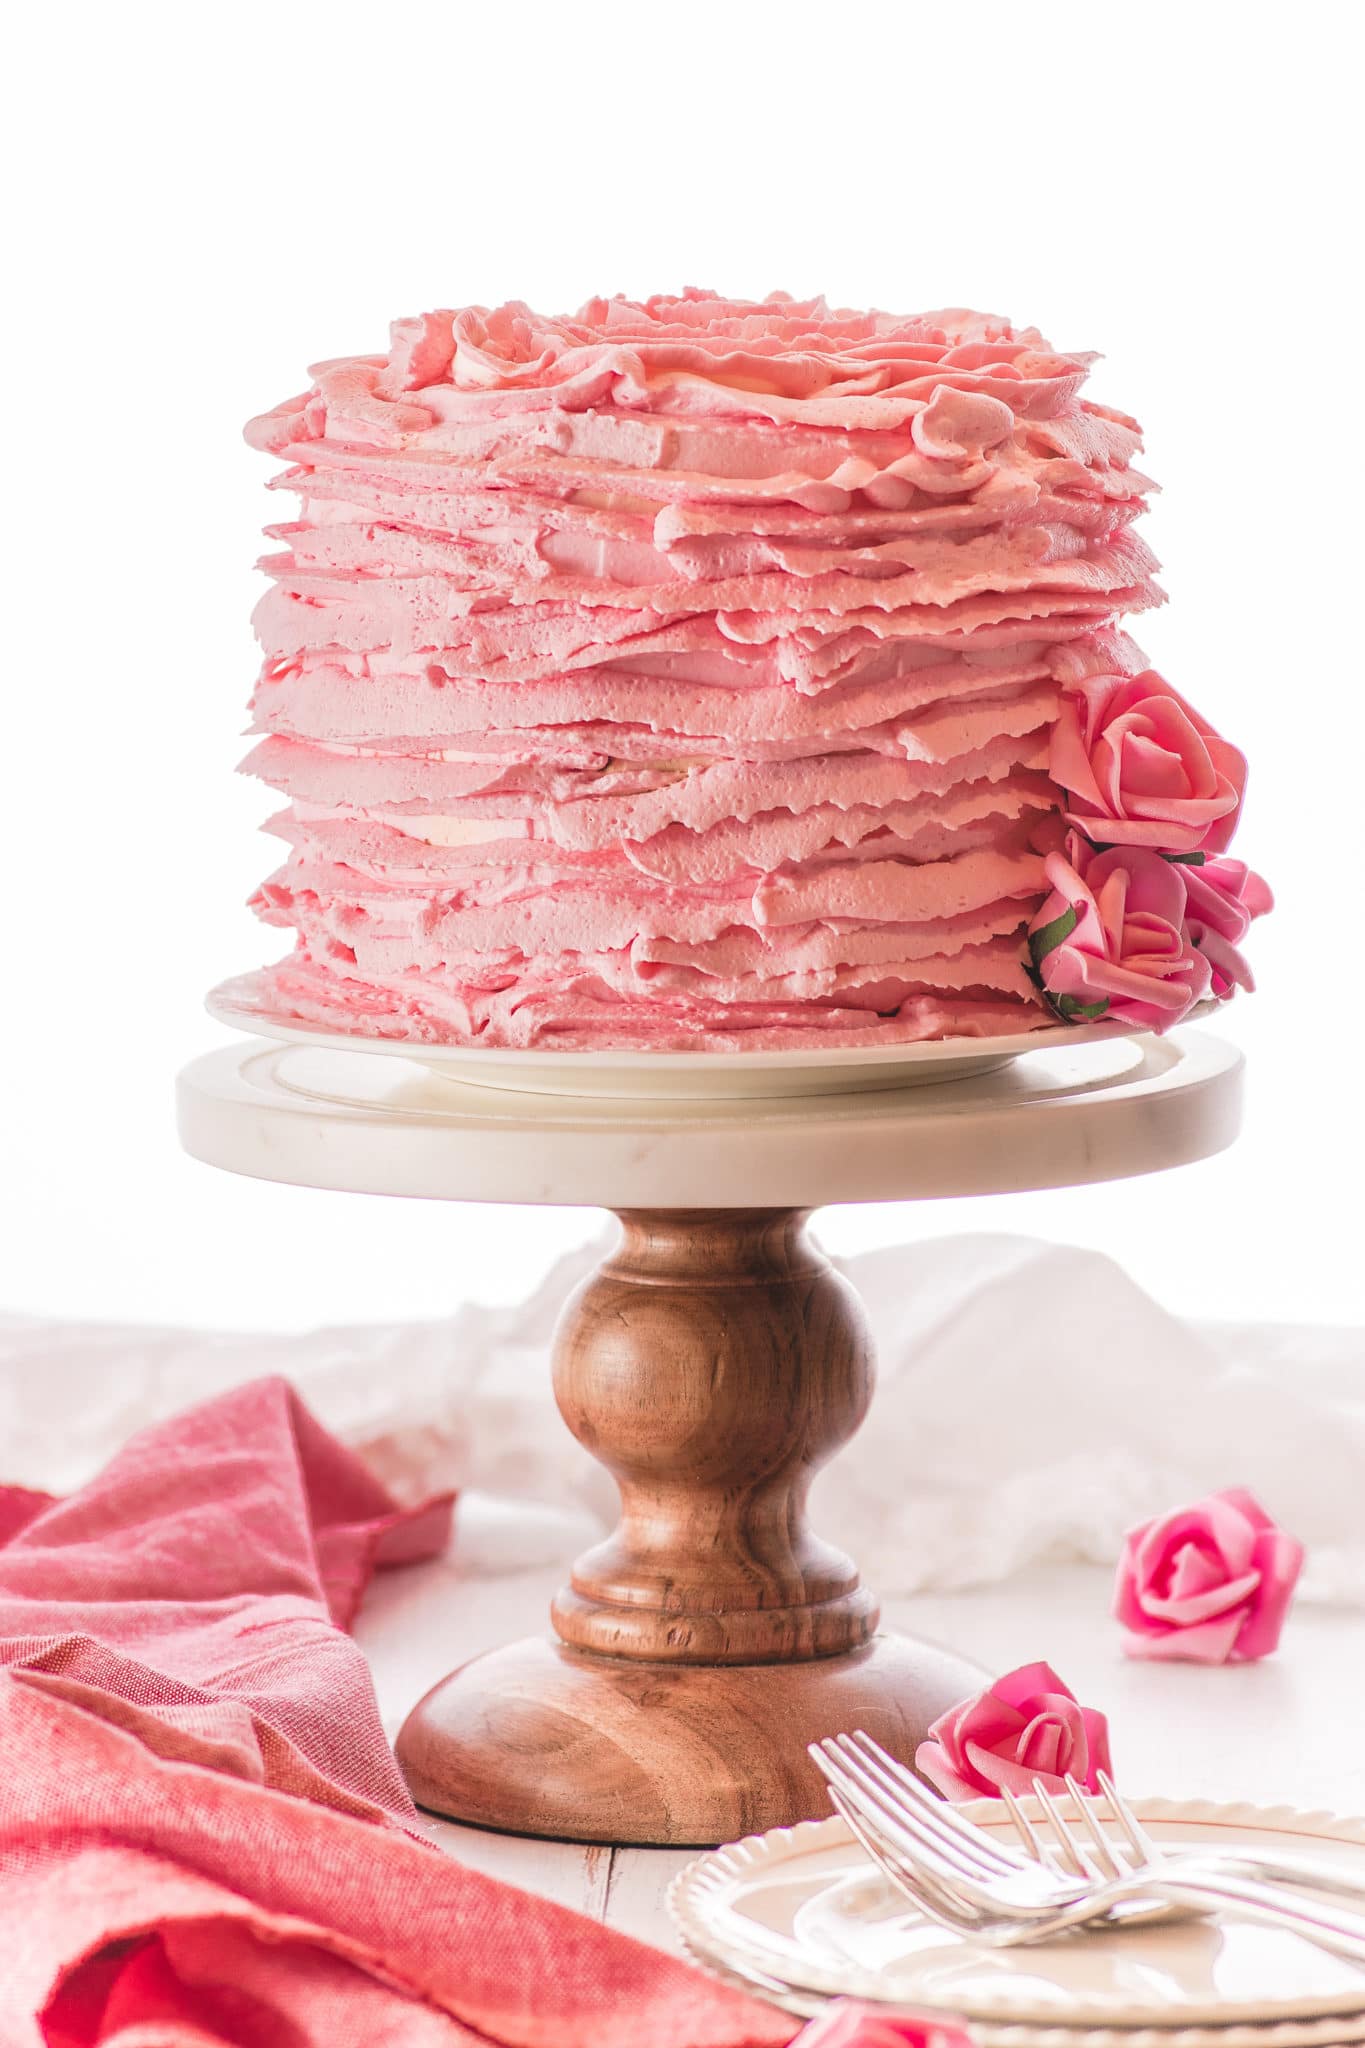 A pink ruffled cake on a marble and wooden cake against a bright white tabletop and background